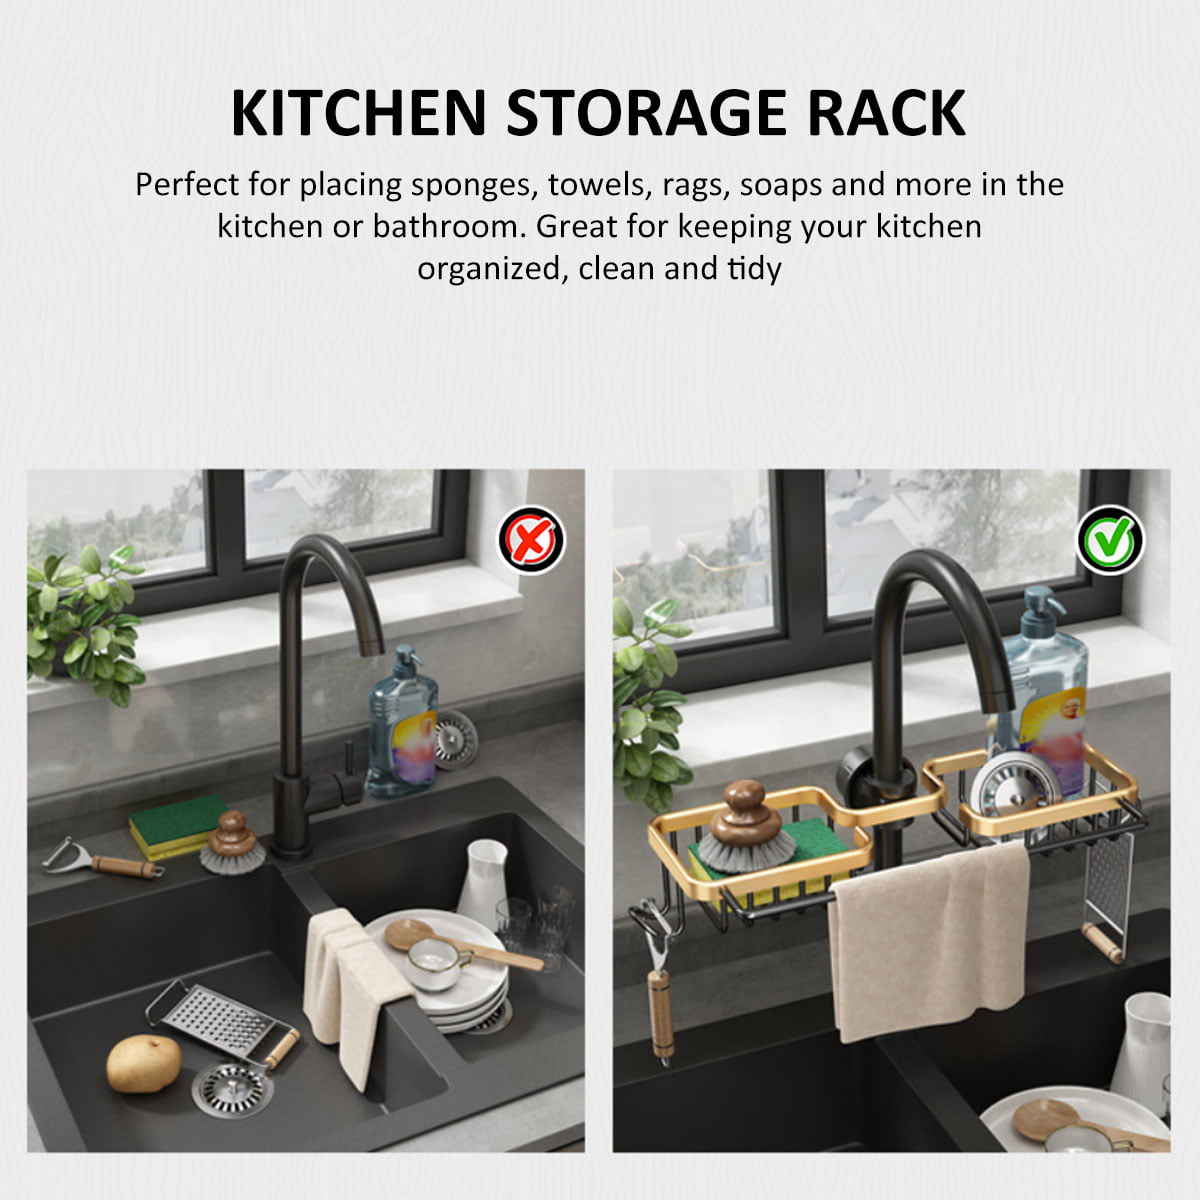 Retrok Faucet Rack Hanging Faucet Sponge Holder Metal Faucet Sponge Holder Soap Dishcloth Brush Sink Caddy Drain Rack Aluminum Organizer for Household and Gifts Bathroom-Black gold